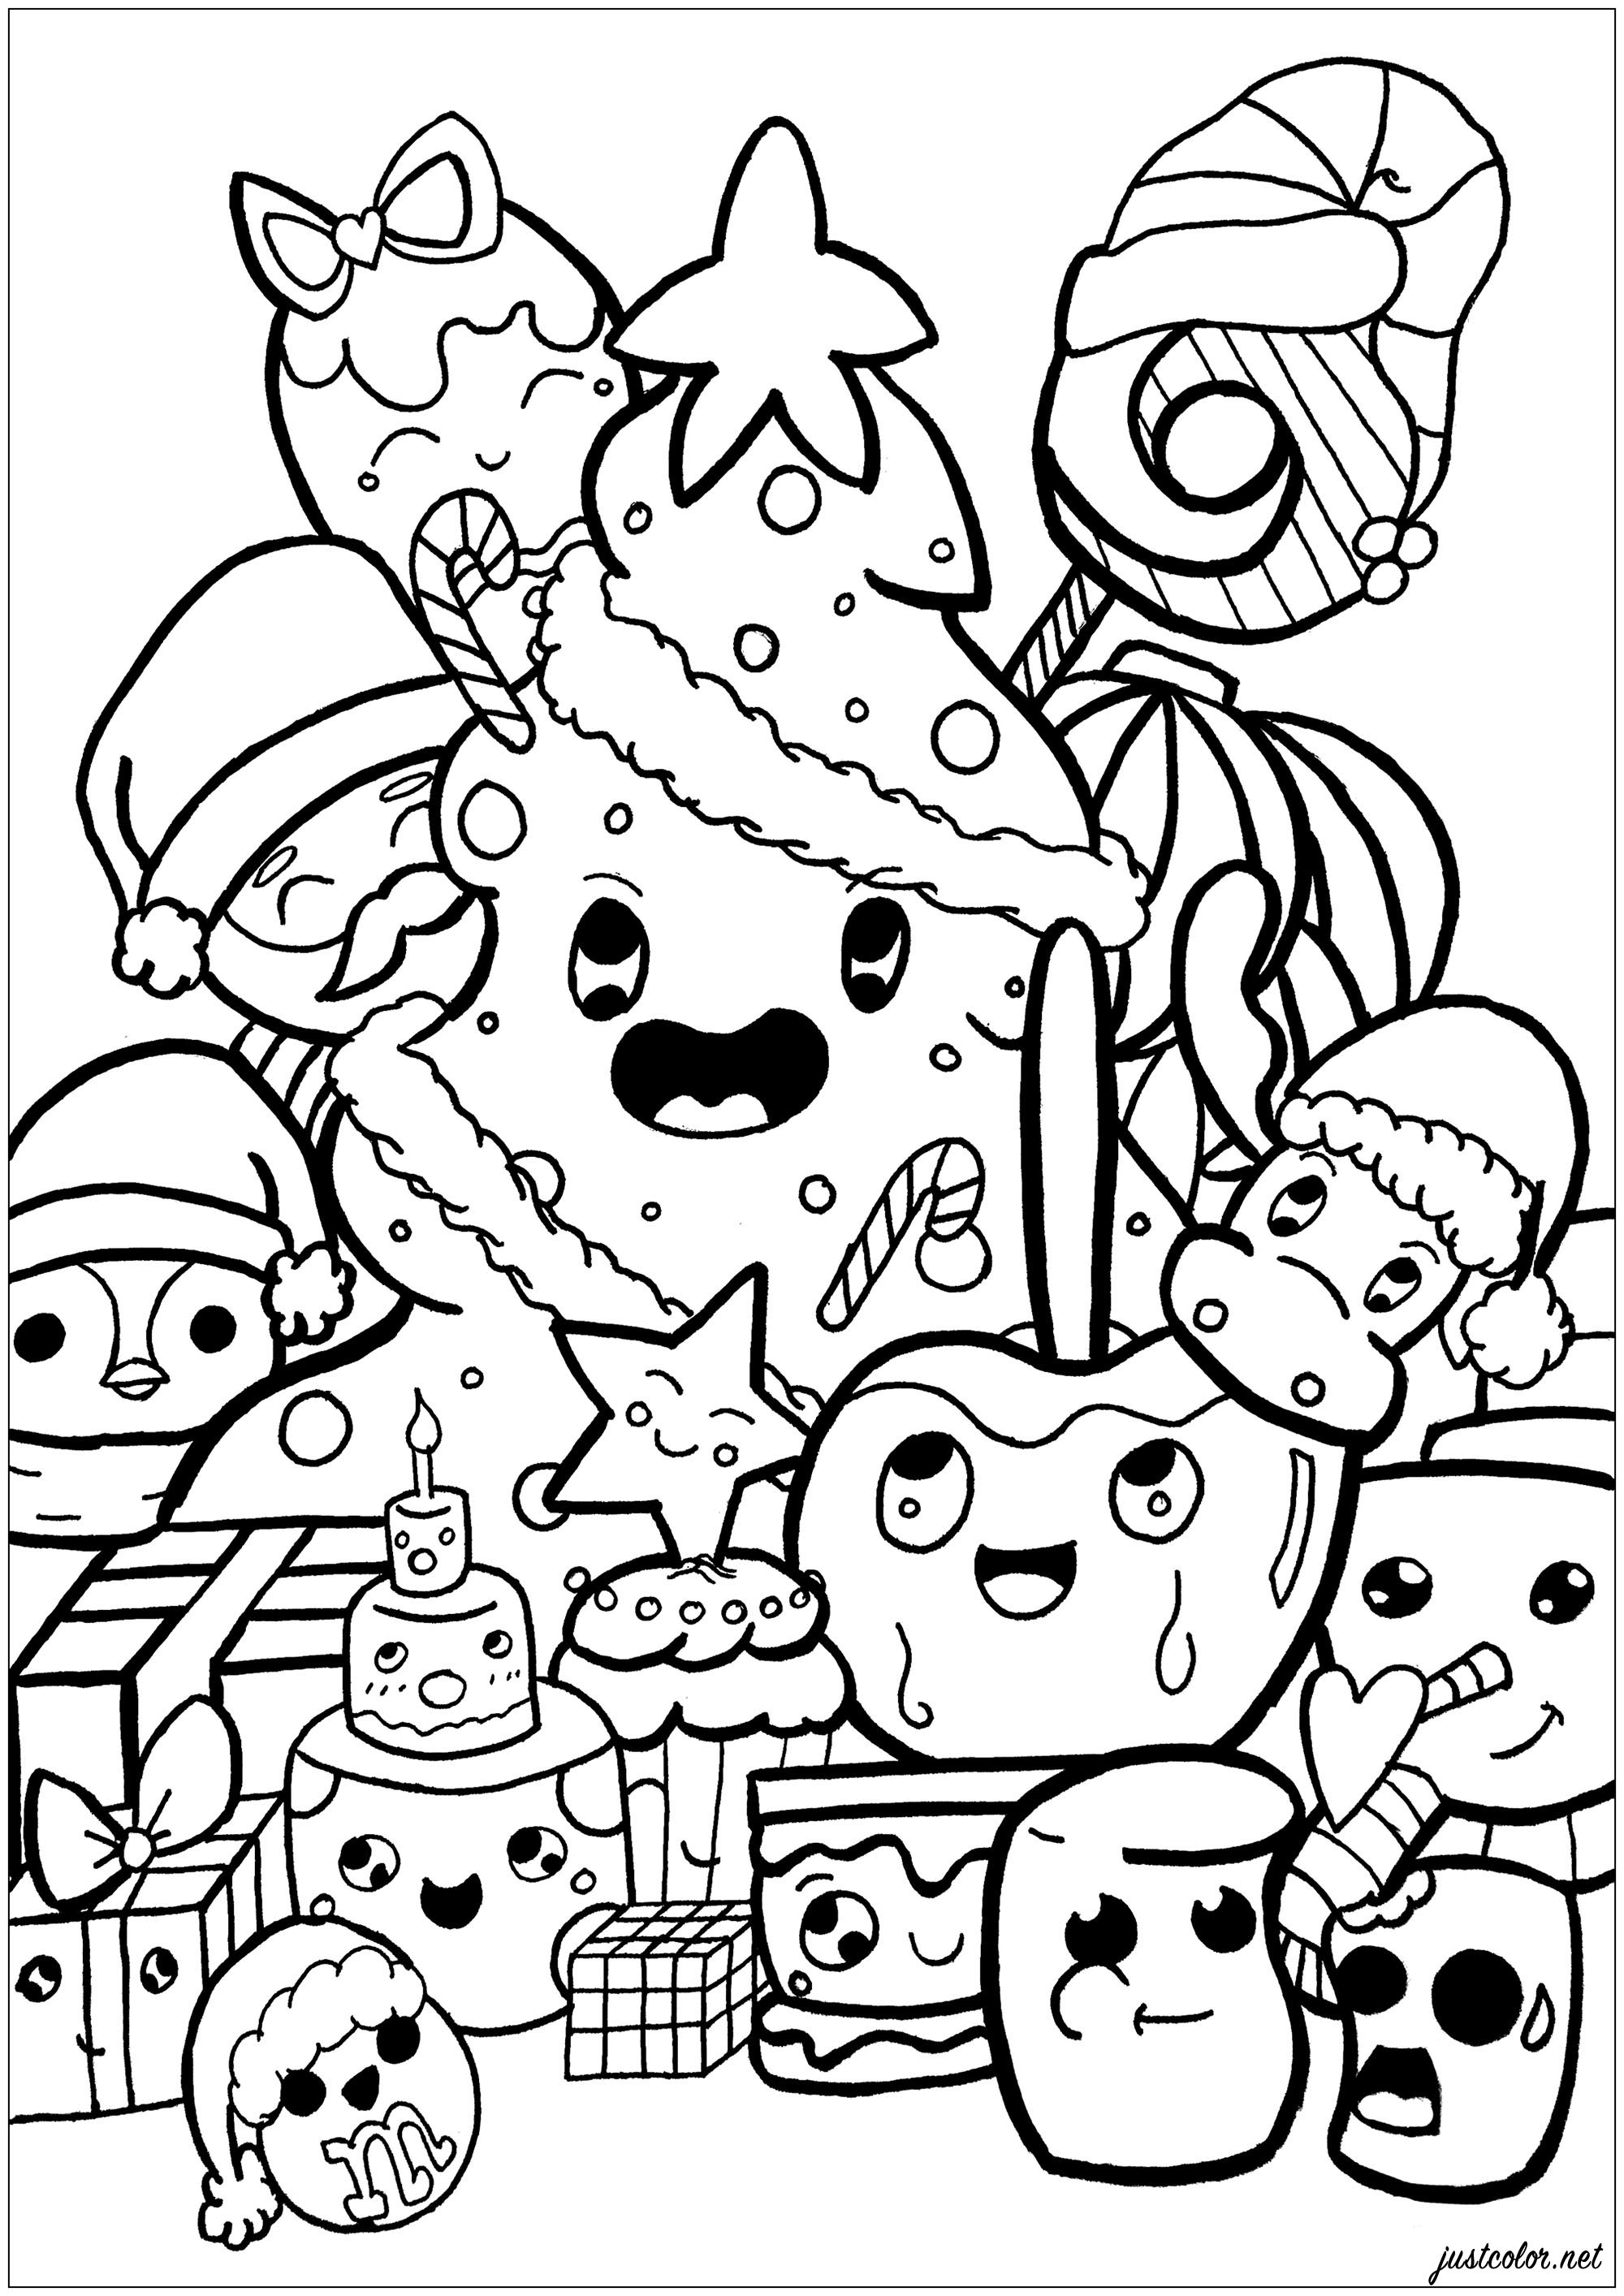 Christmas Doodle - Doodle Art / Doodling Adult Coloring Pages